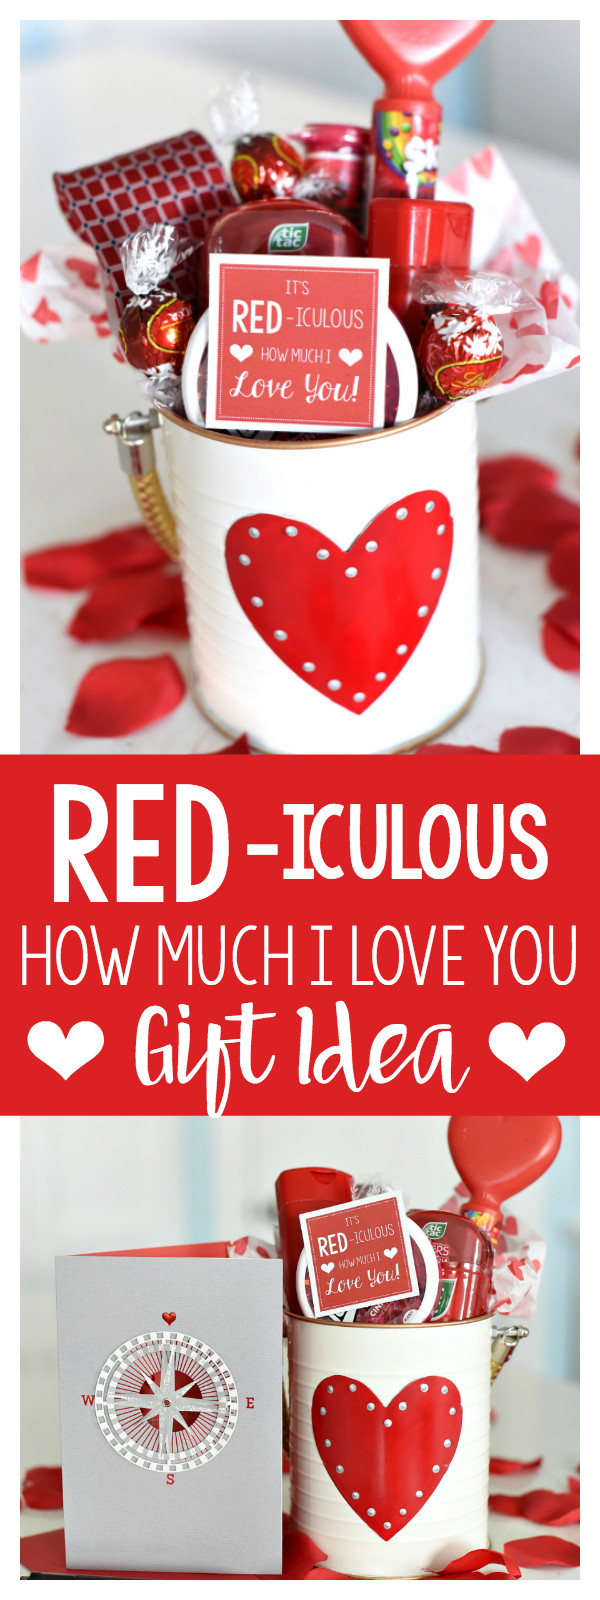 Valentine Day Gift Box Ideas
 Cute Valentine s Day Gift Idea RED iculous Basket